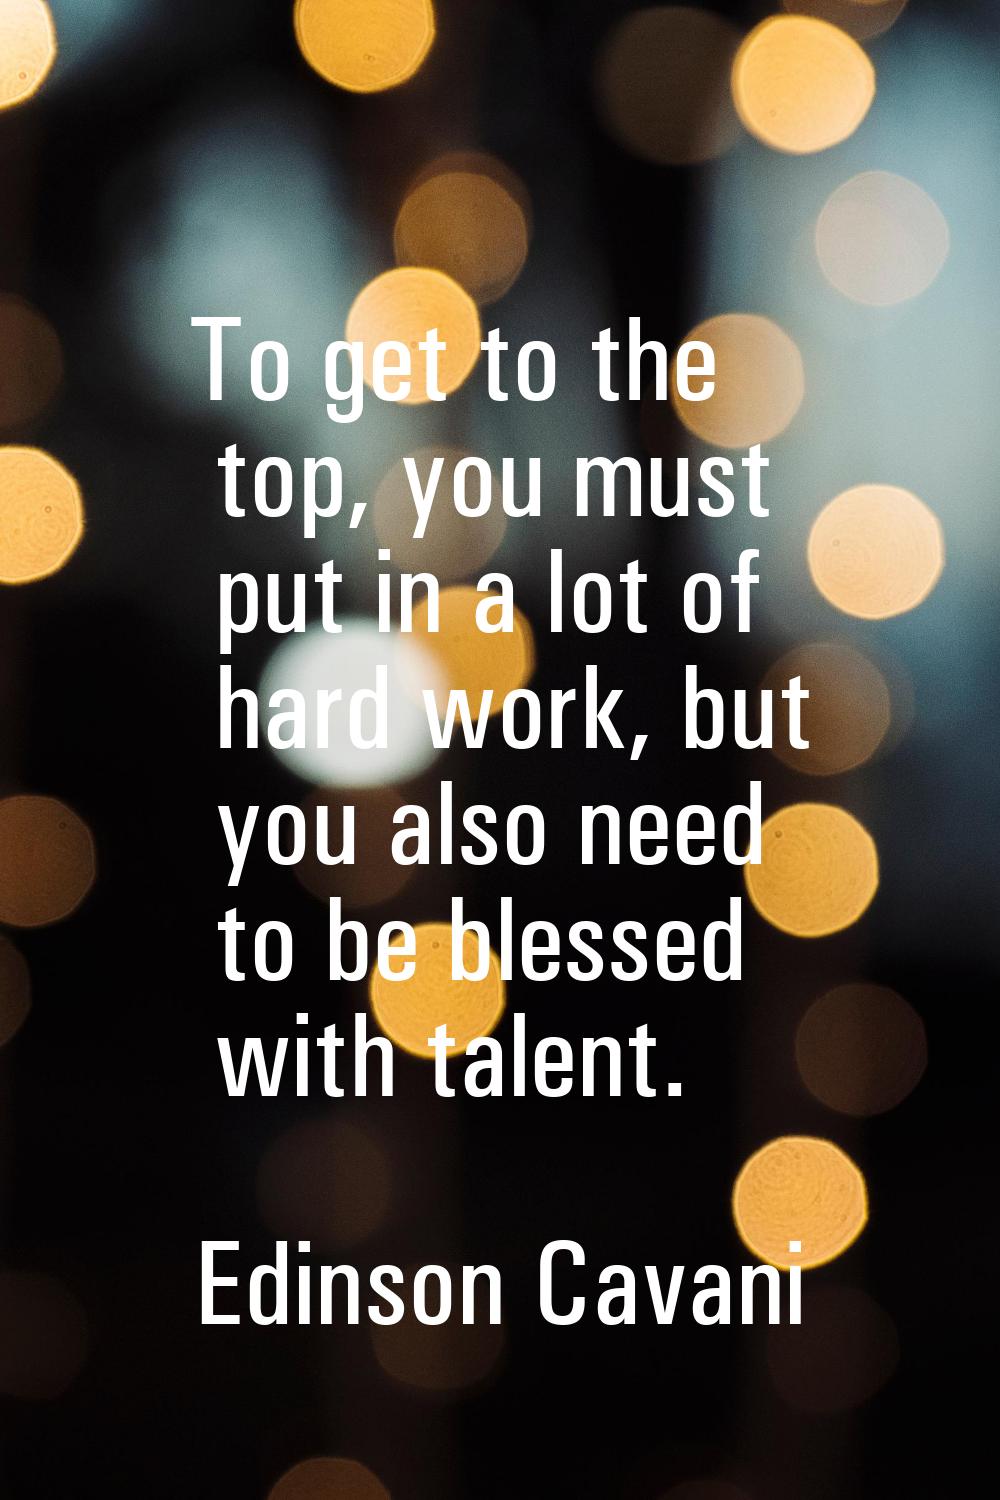 To get to the top, you must put in a lot of hard work, but you also need to be blessed with talent.